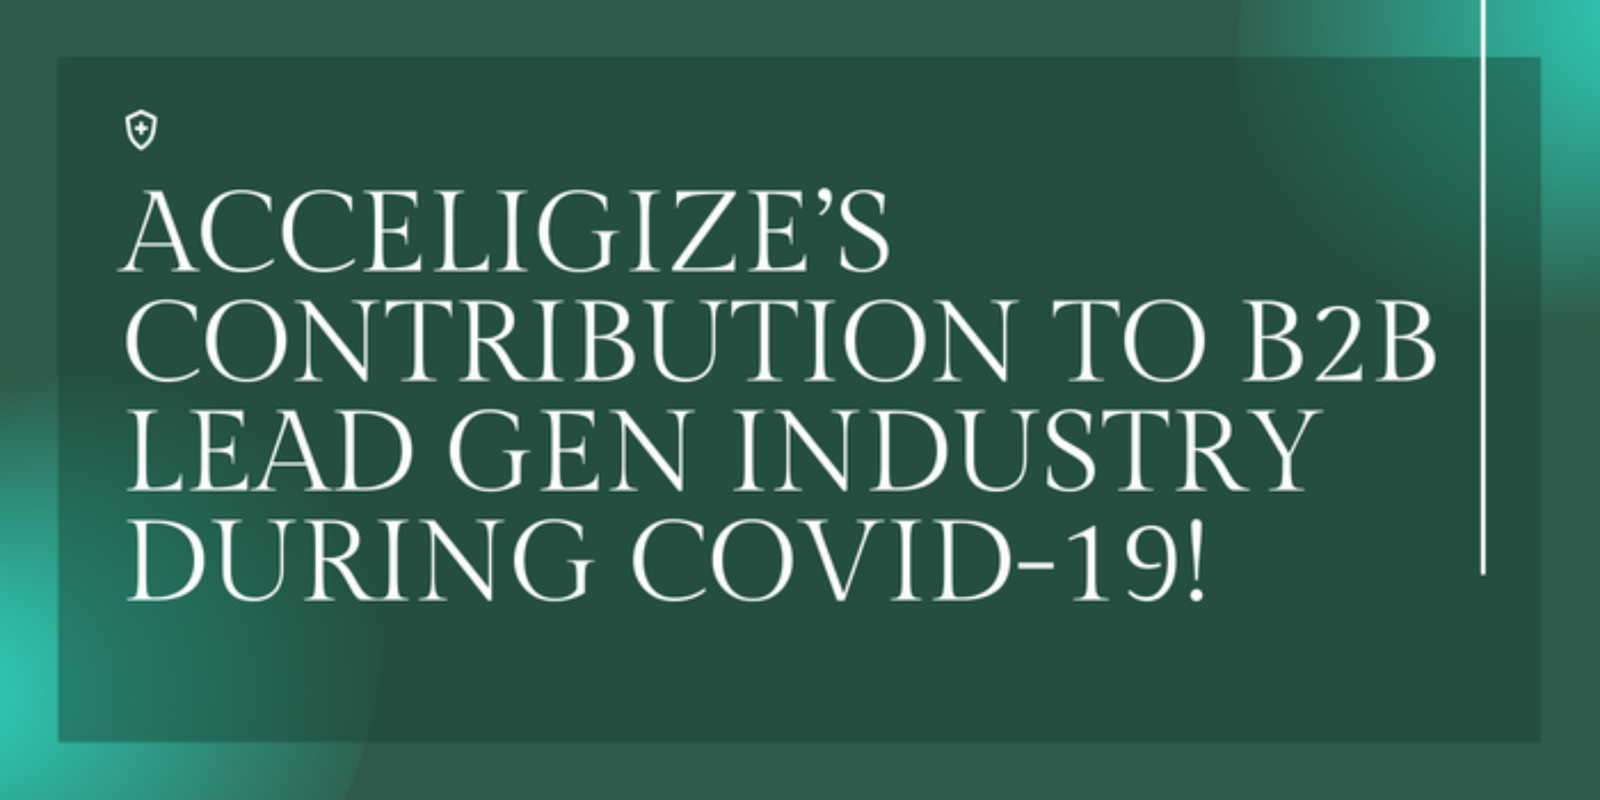 ACCELIGIZE’S CONTRIBUTION TO B2B LEAD GEN INDUSTRY DURING COVID-19!